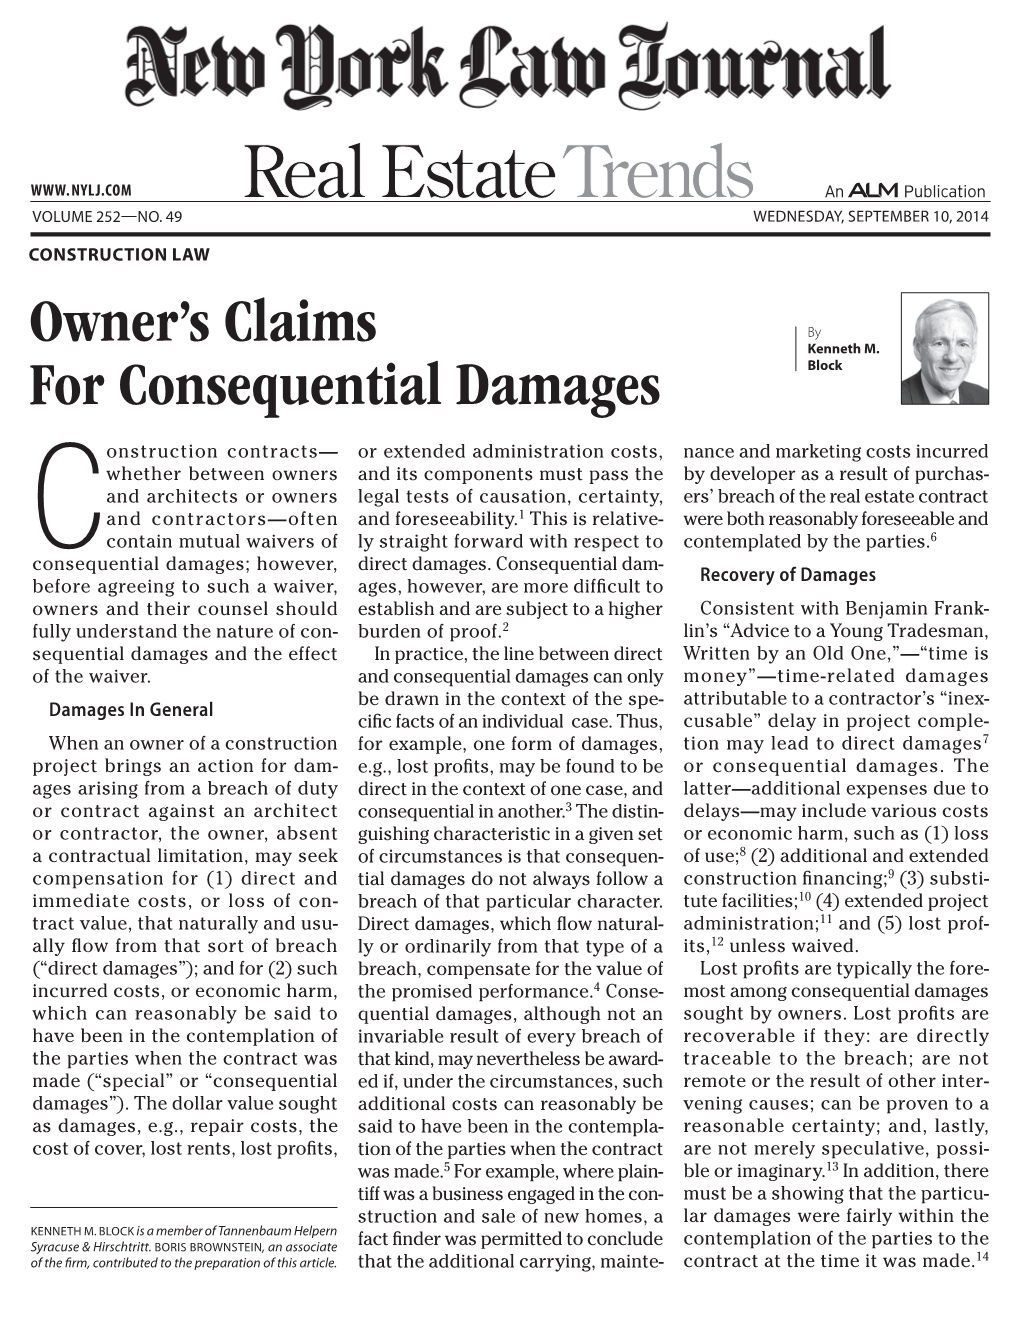 Owner's Claims for Consequential Damages